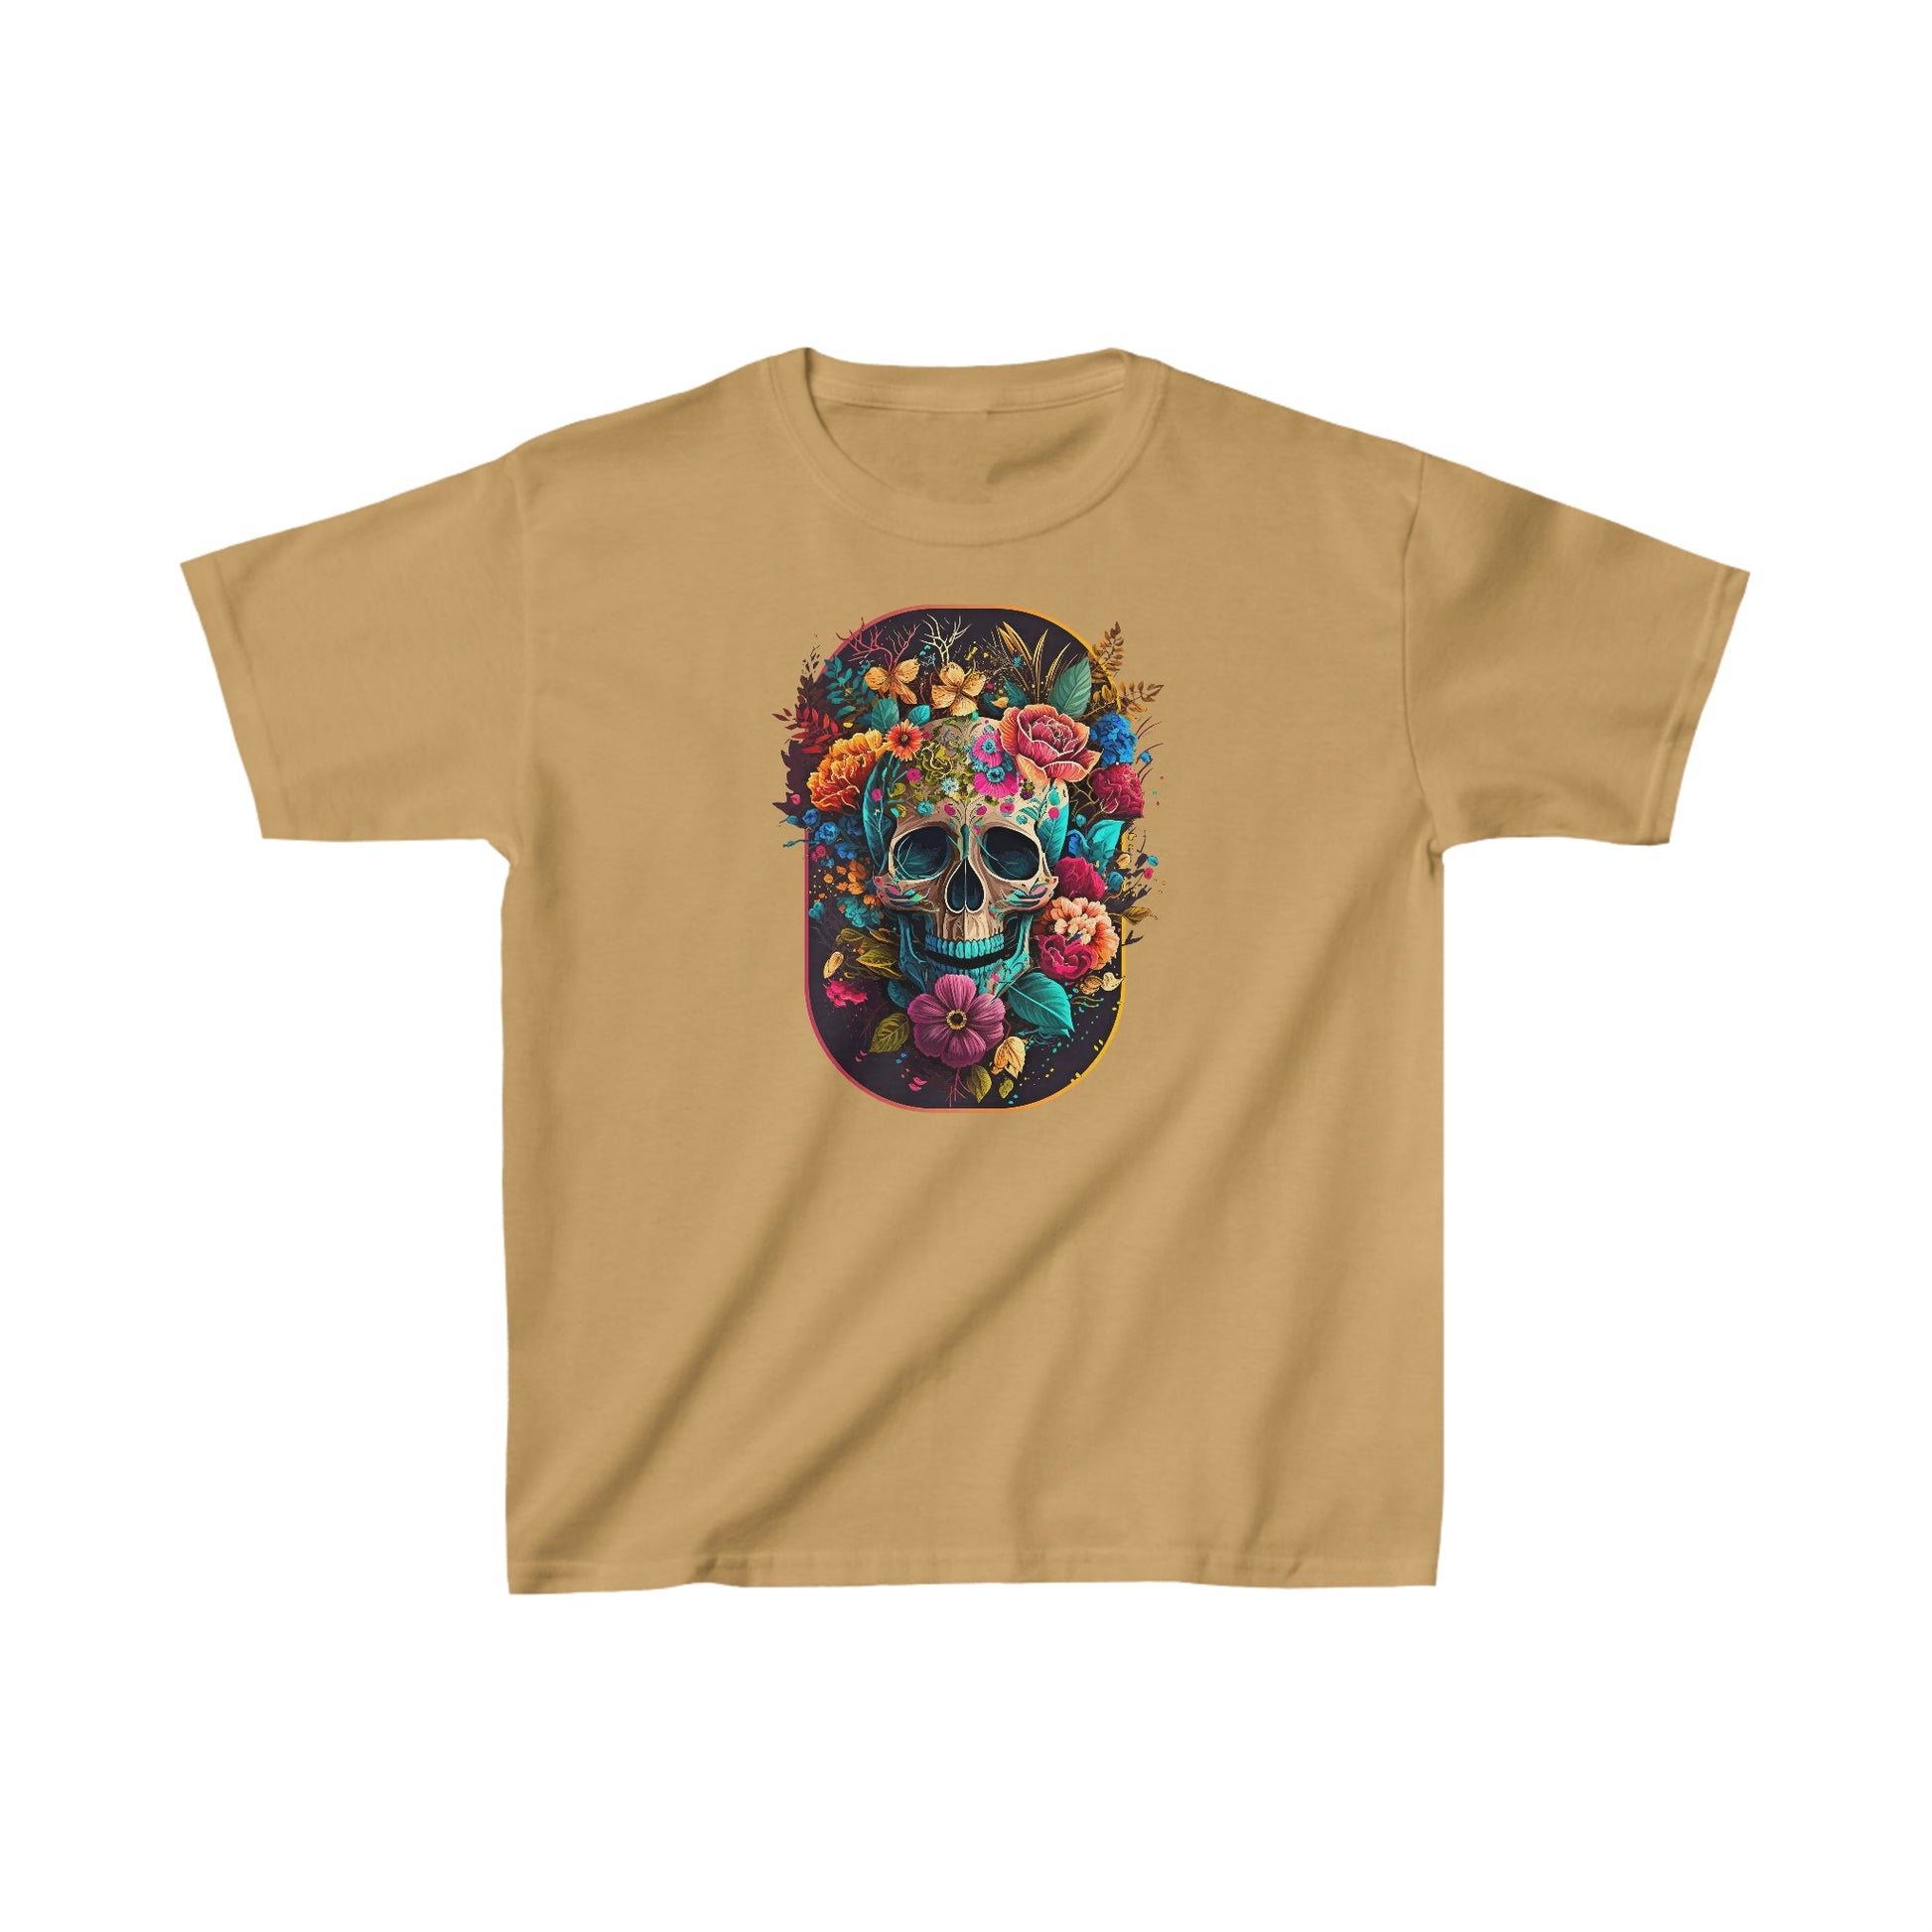 CrazyYetiClothing, CYC, Floral Skull (Kids Tee), Kids clothes